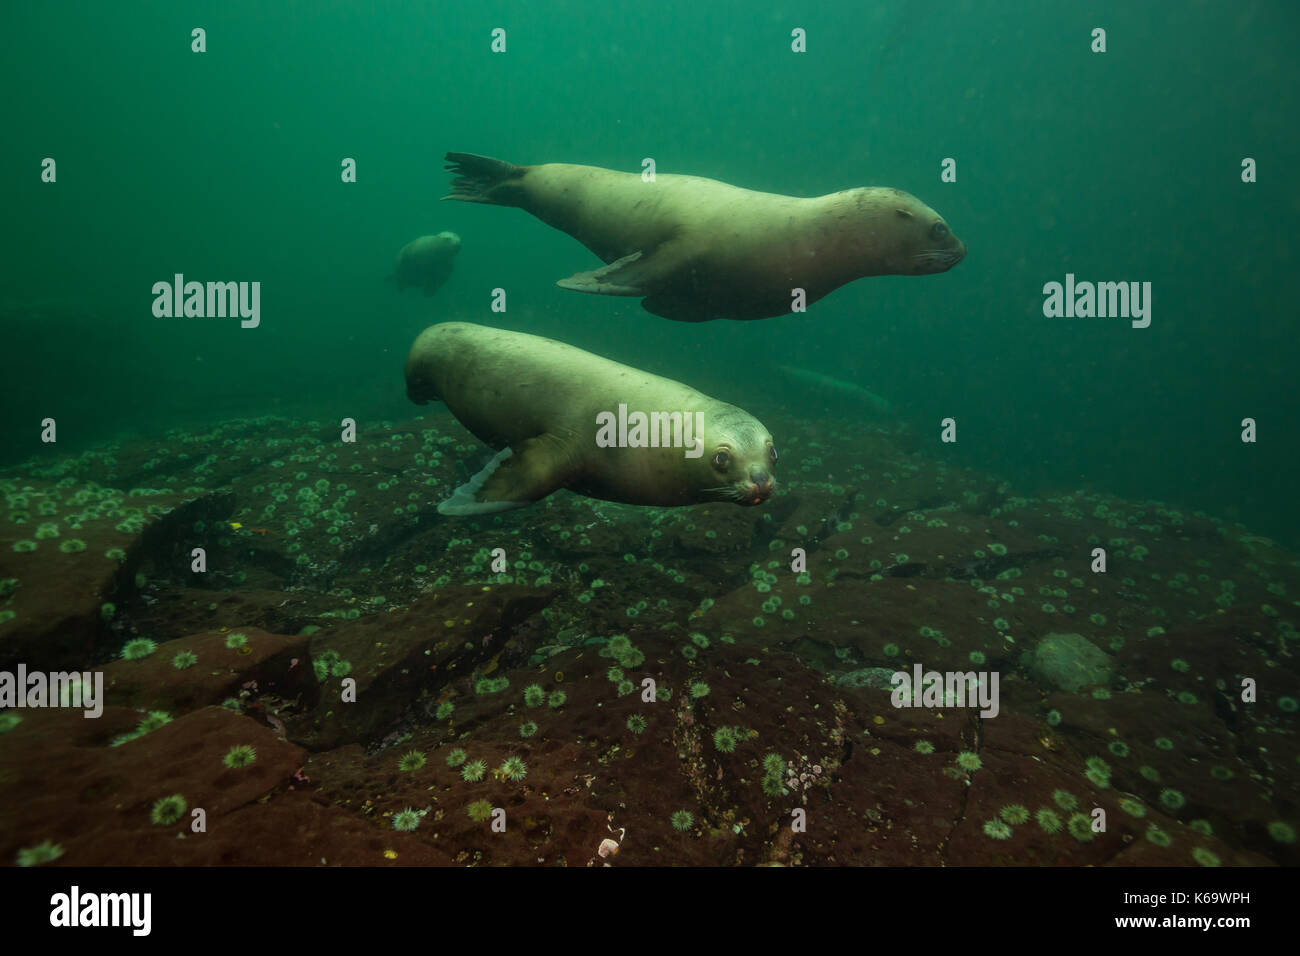 Sea Lions swimming underwater. Picture taken in Pacific Ocean near Hornby Island, BC, Canada. Stock Photo